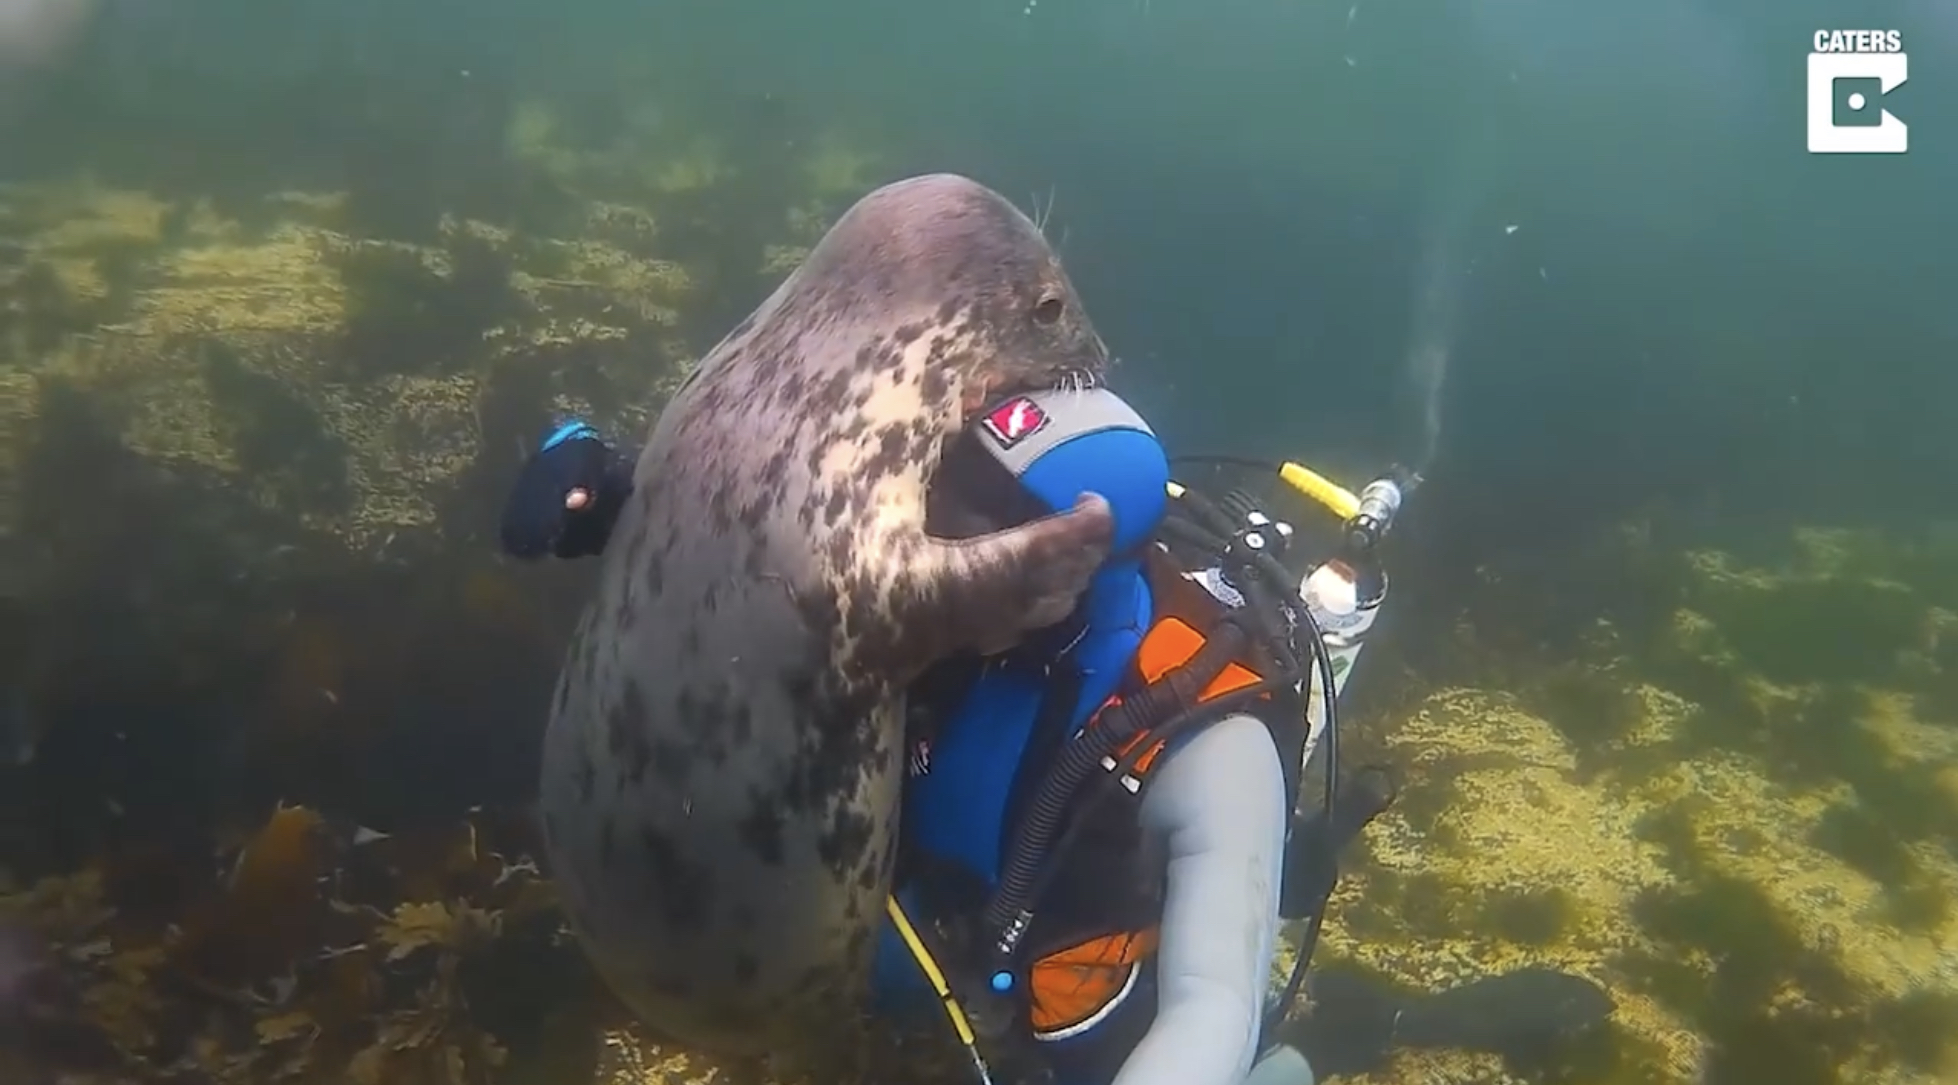 The video shows a grey seal (Halichoerus grypus) playing with Ben Burville @Sealdiver off the Northumberland coast, UK.